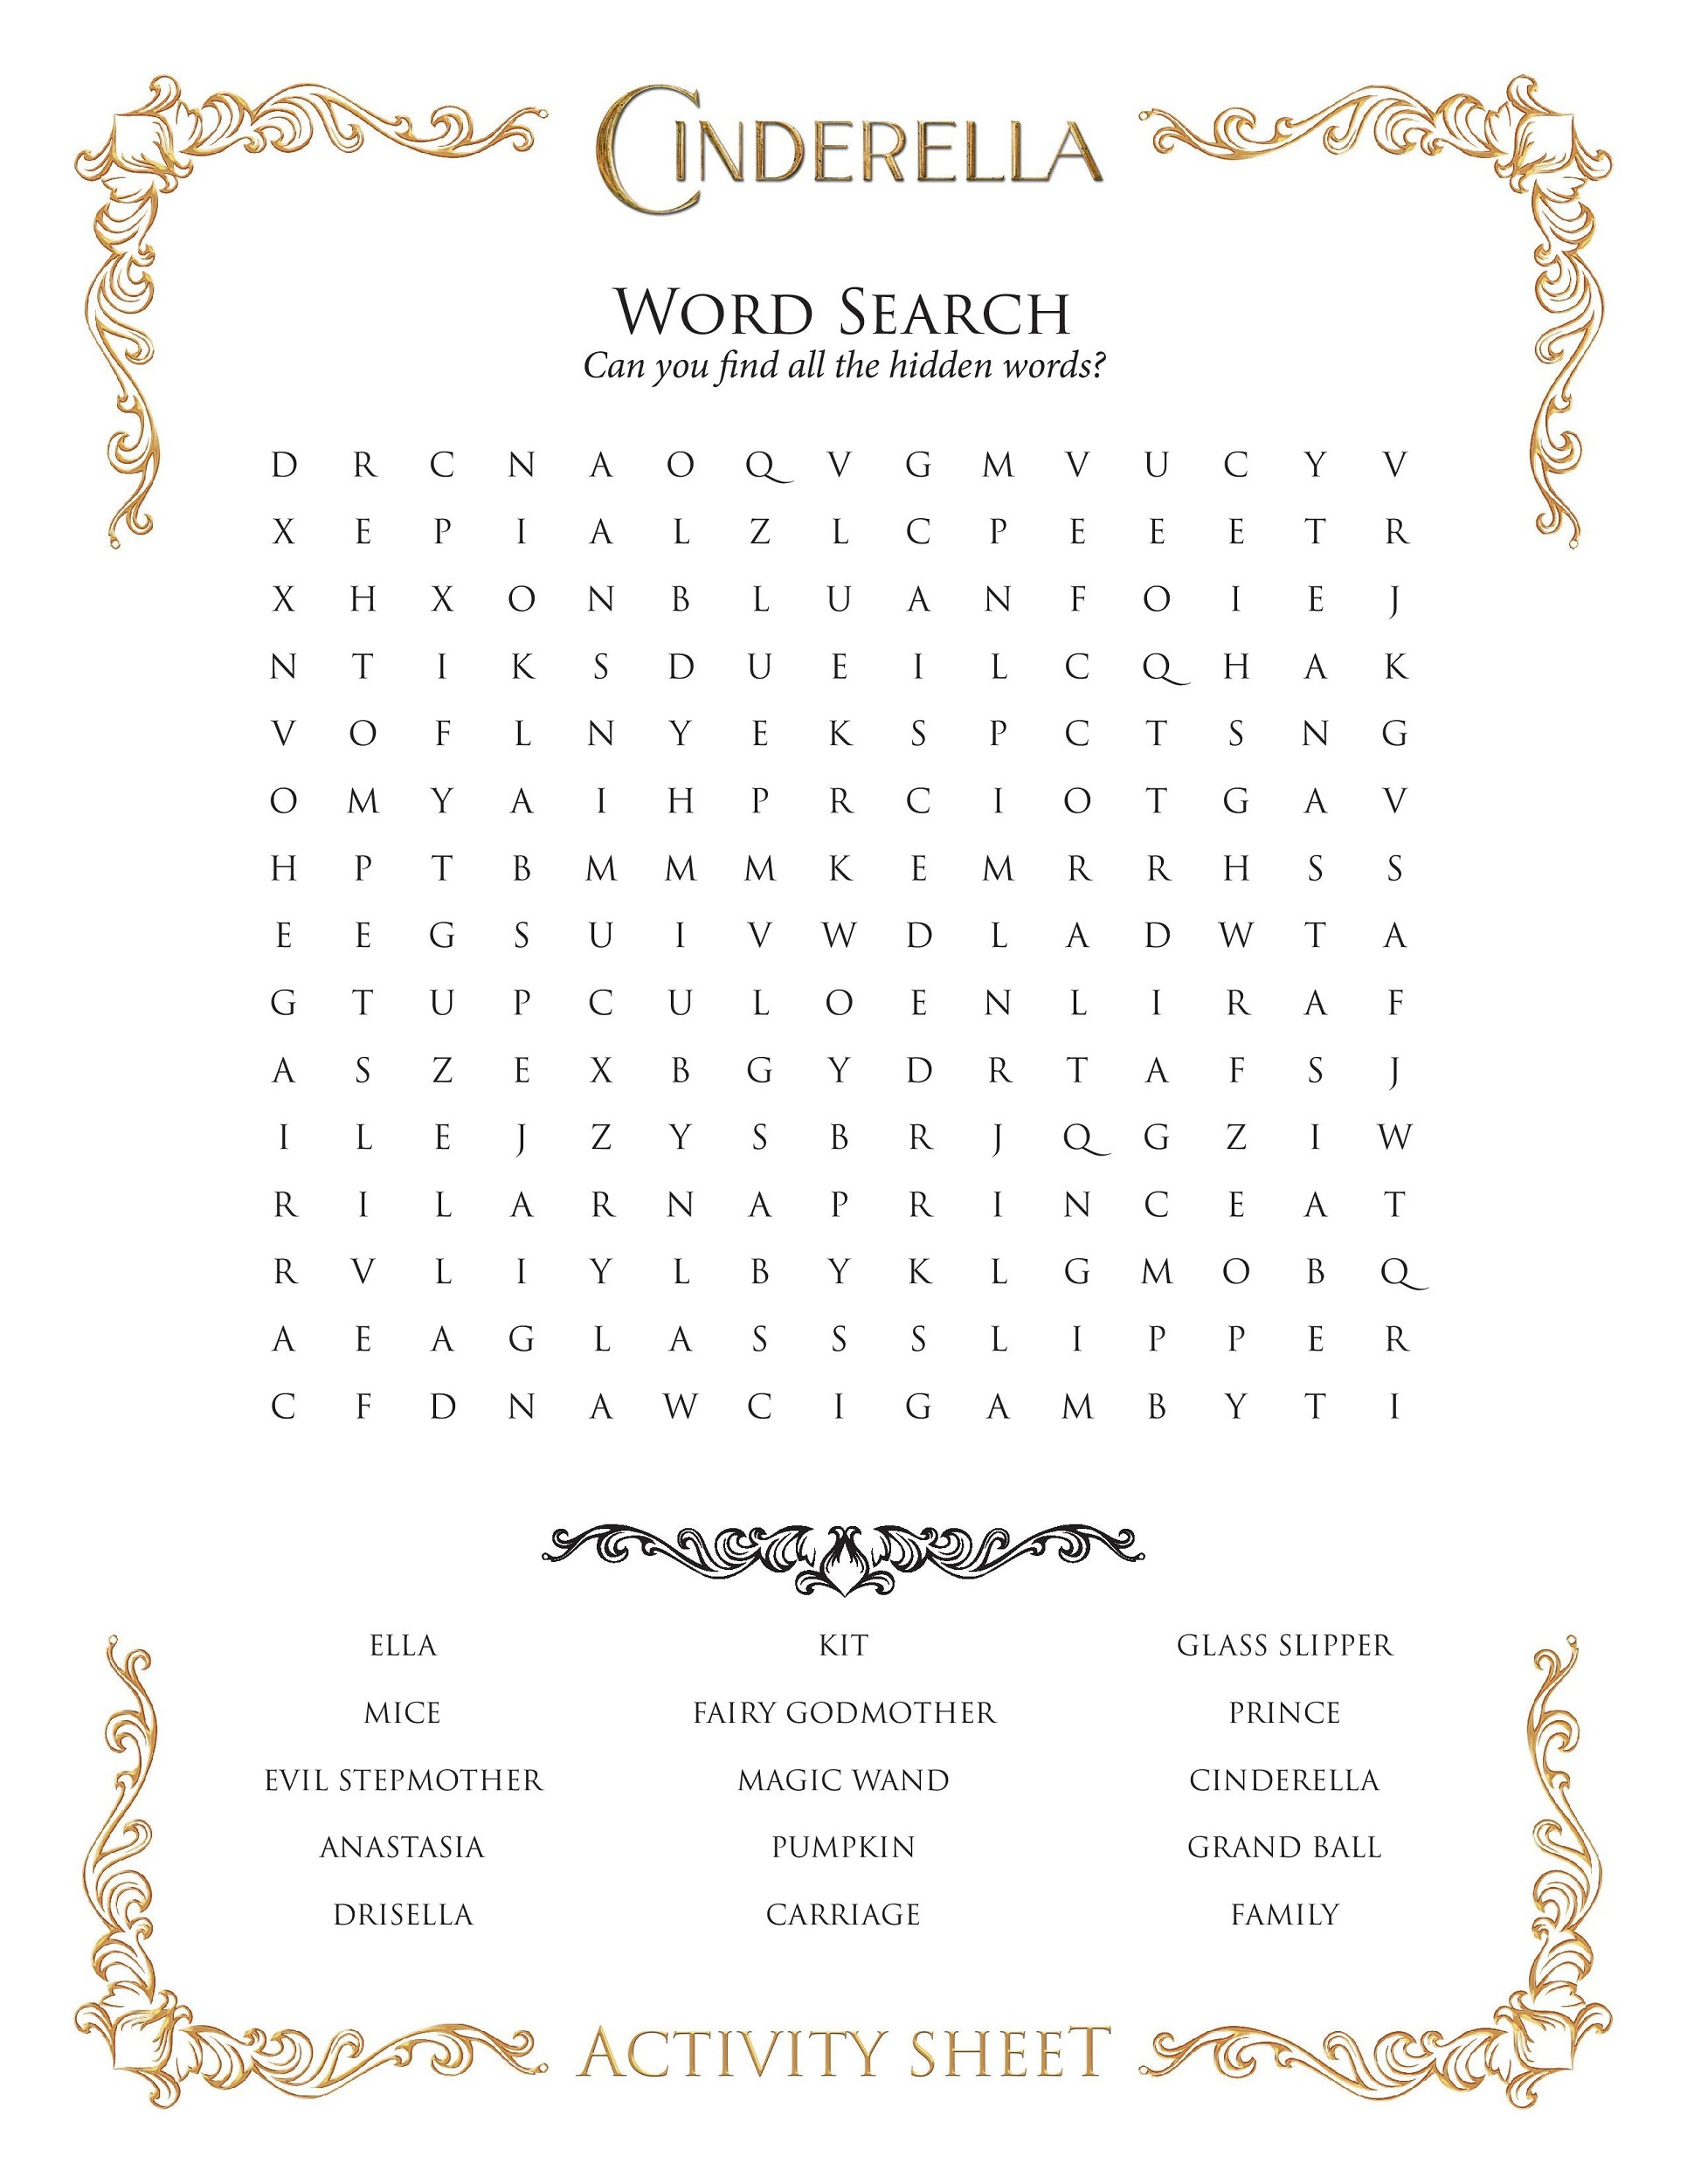 15 Free Disney Word Searches | Kittybabylove for Free Disney Word Search